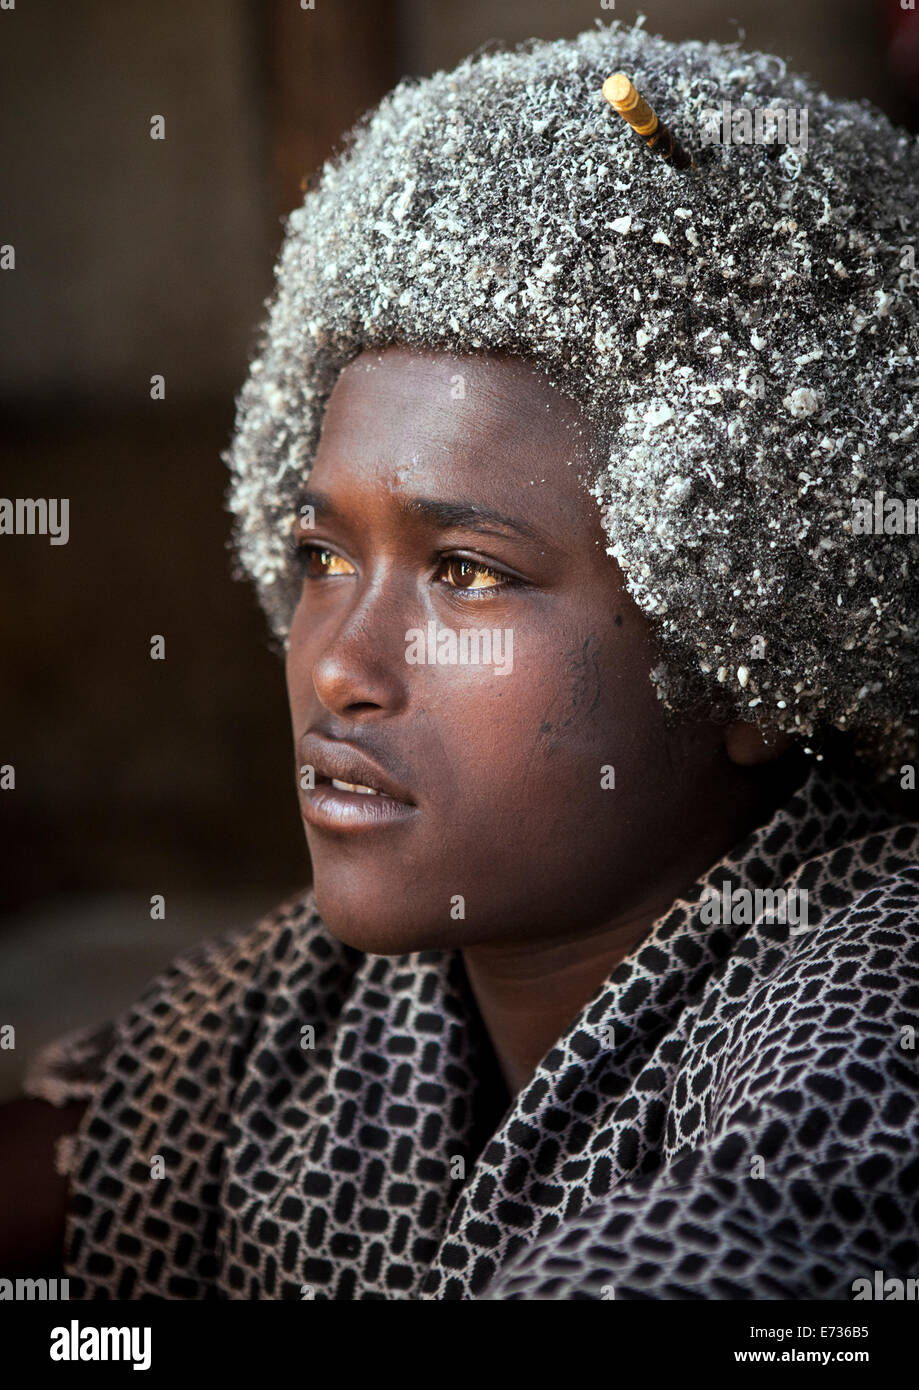 Download preview image - mr-awol-mohammed-afar-tribe-man-mille-ethiopia-E736B5